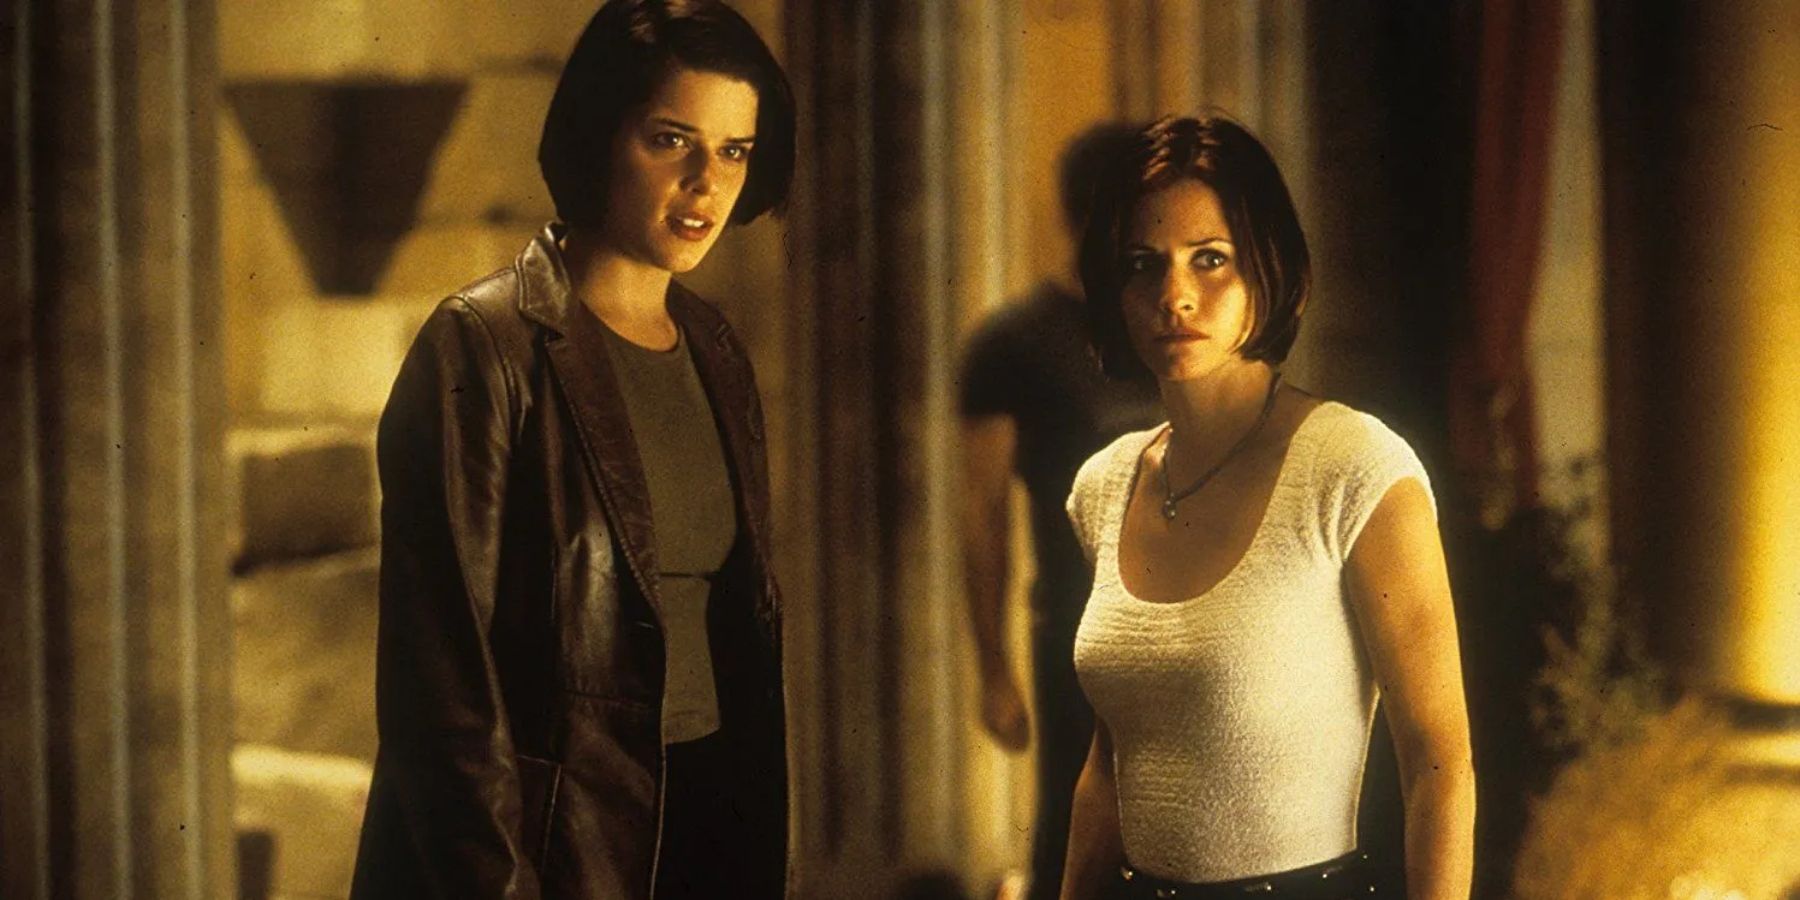 Sidney Prescott (Neve Campbell) and Gale Weathers (Courteney Cox) in Scream 2